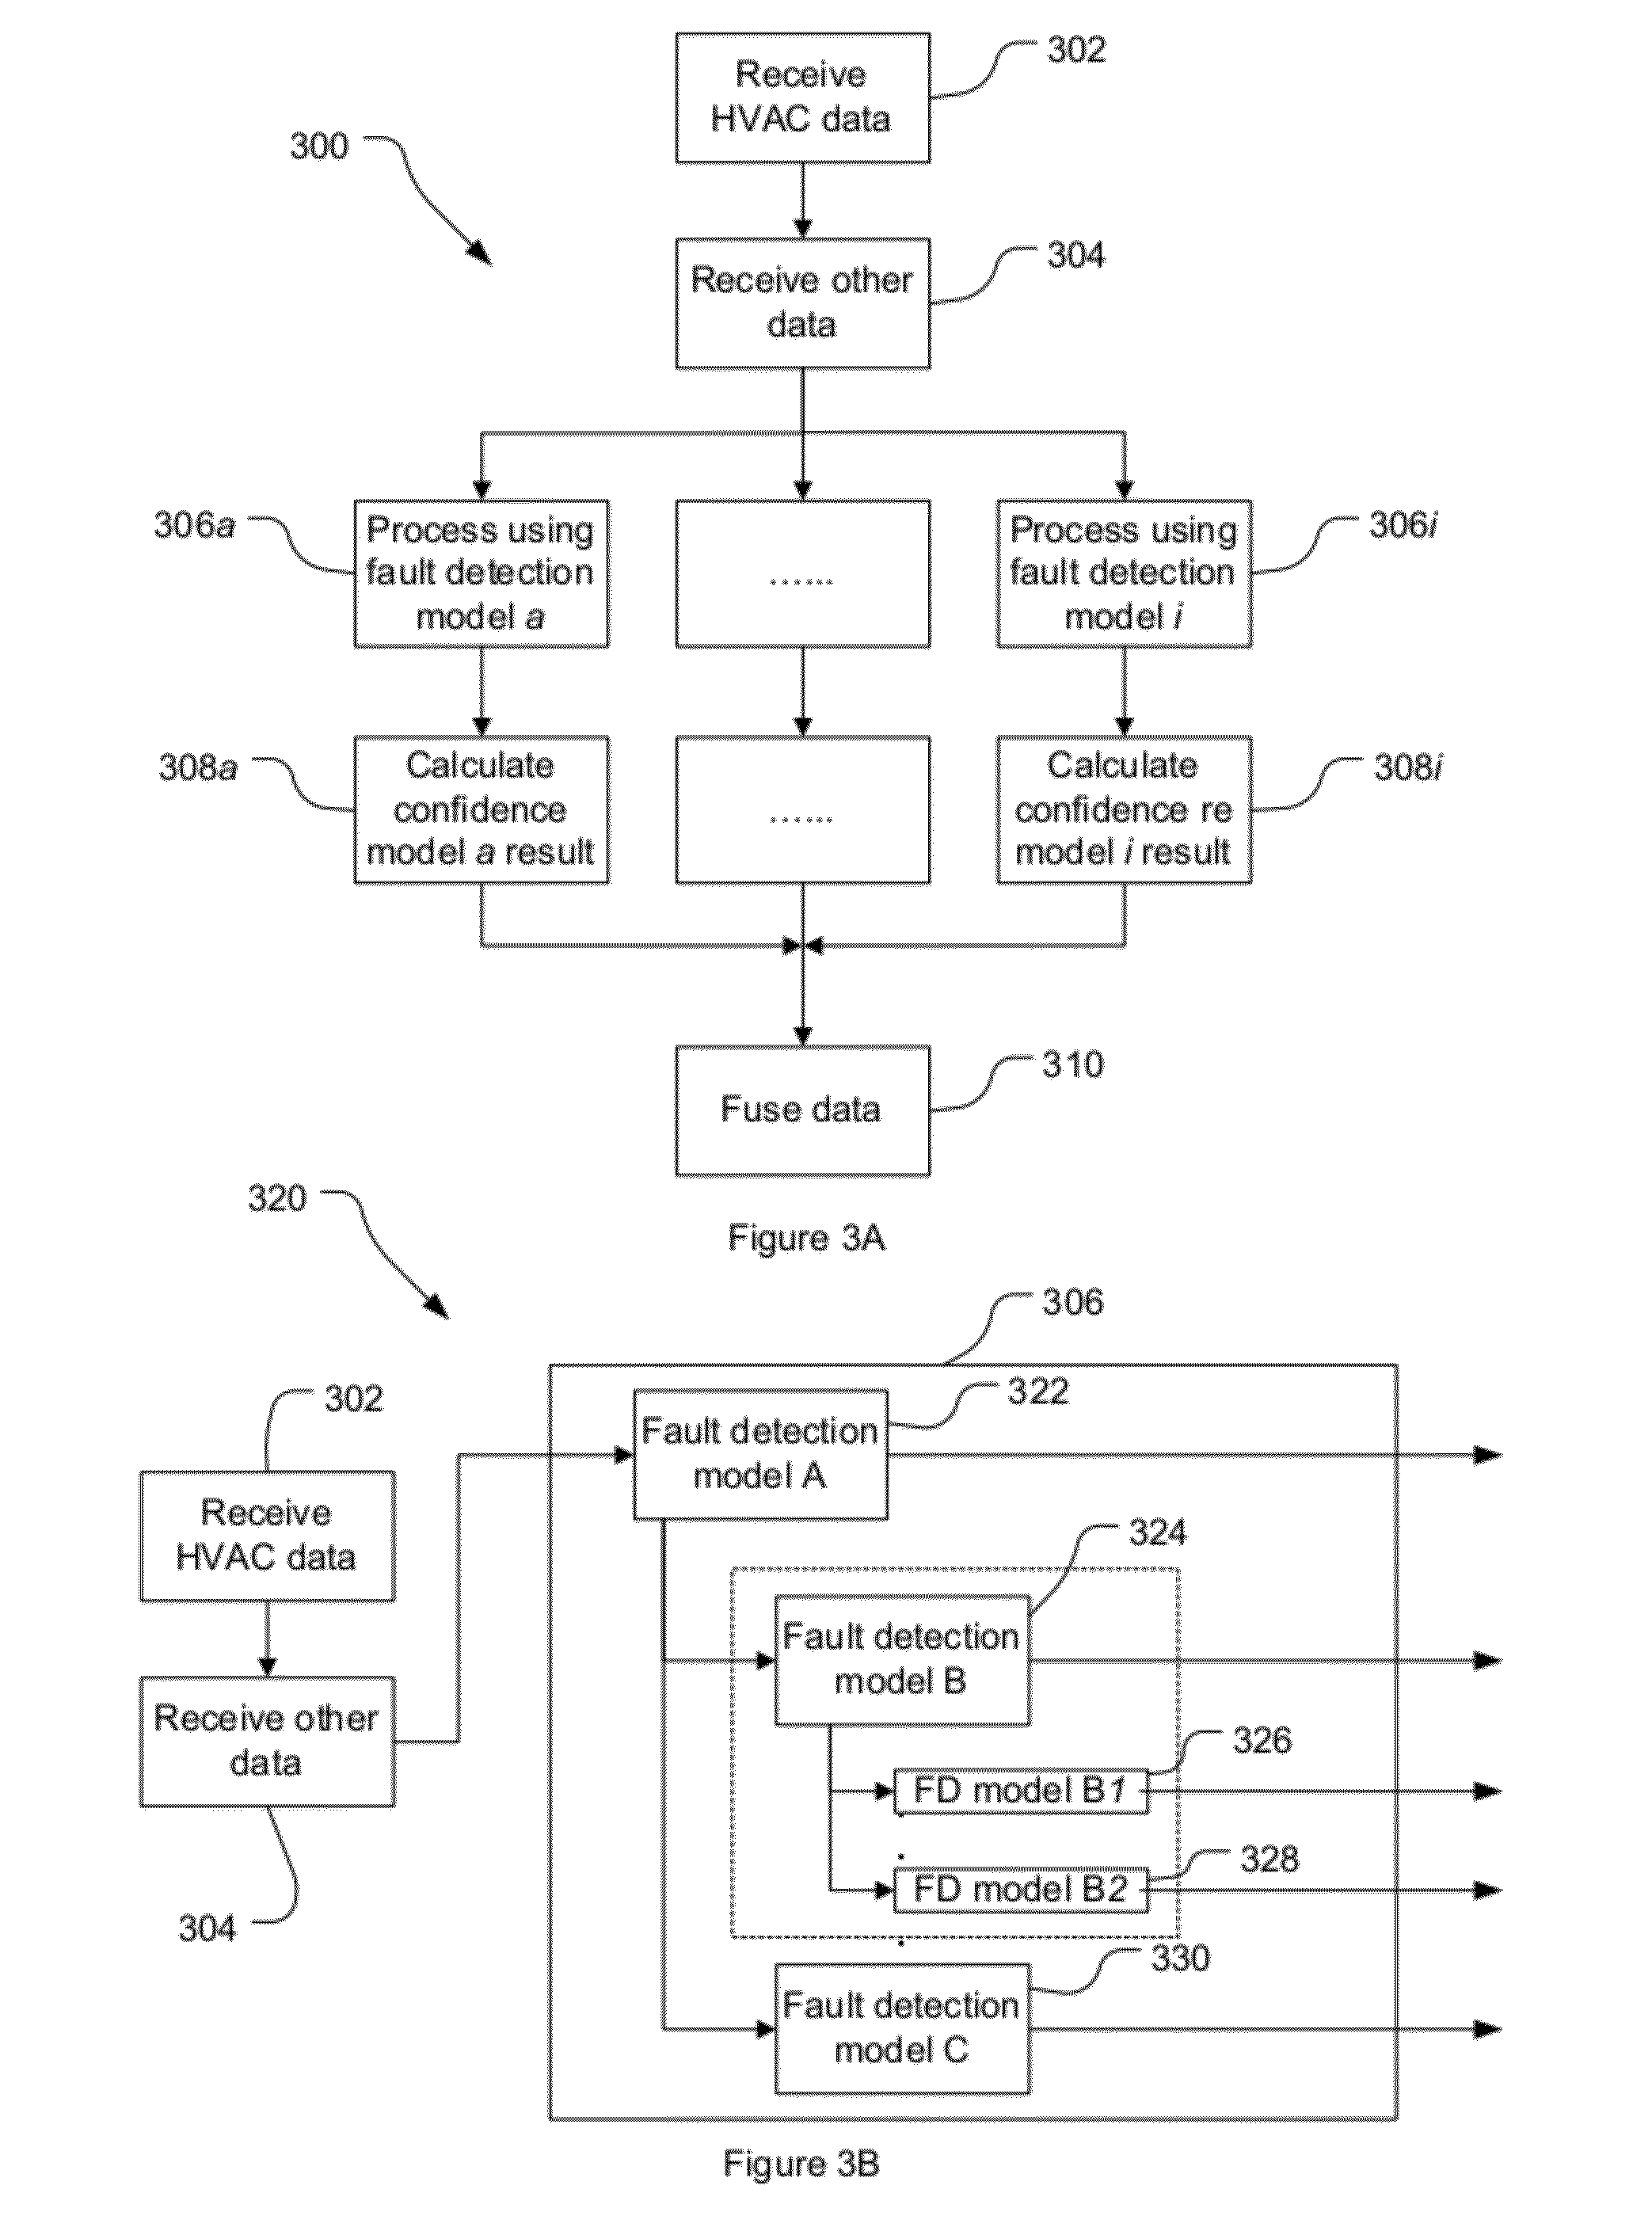 System and method for detecting and/or diagnosing faults in multi-variable systems